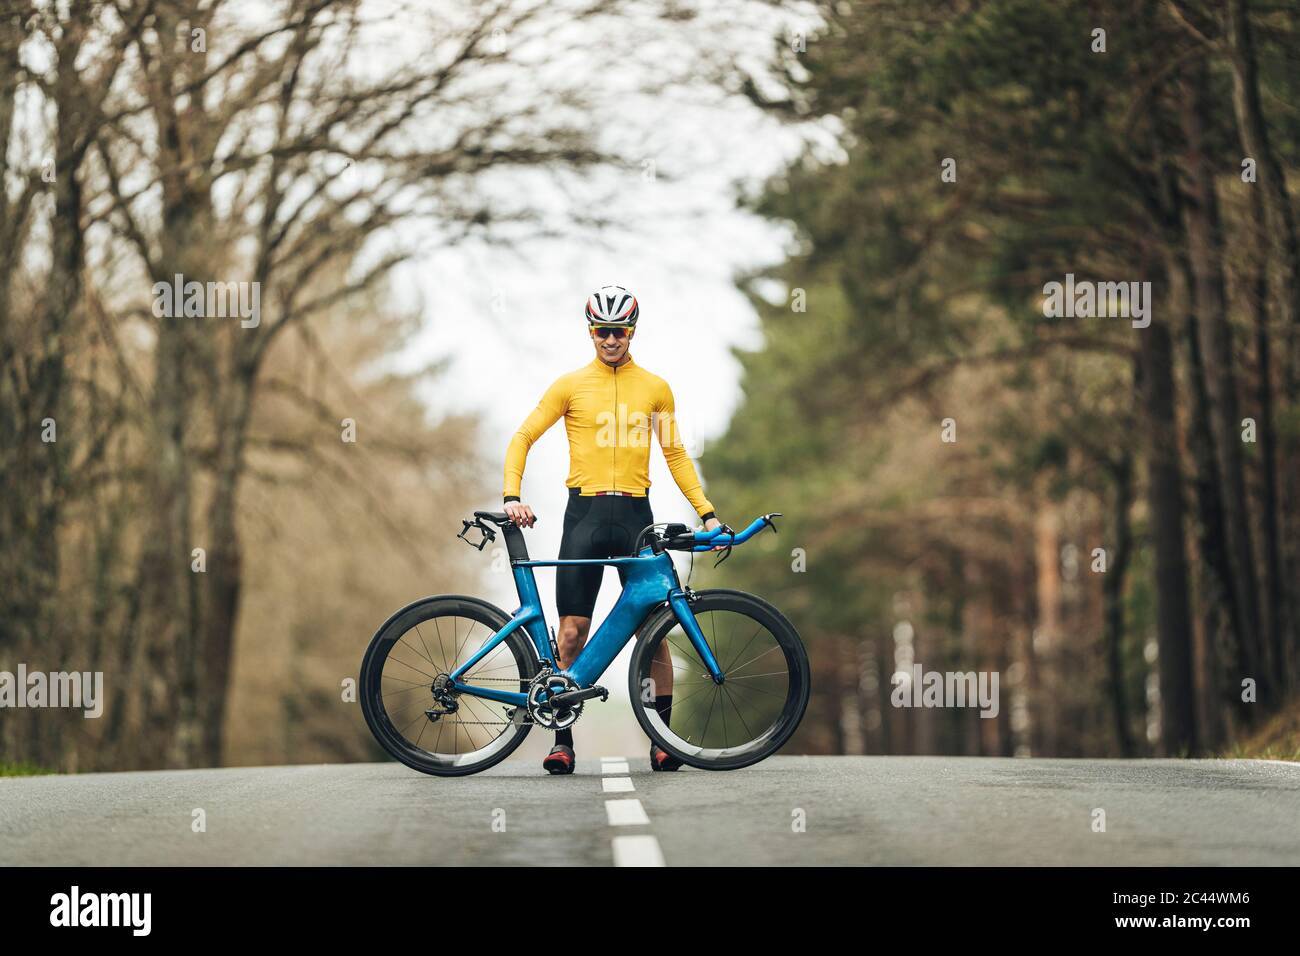 Smiling young man in sports clothing standing with mountain bicycle on country road Stock Photo